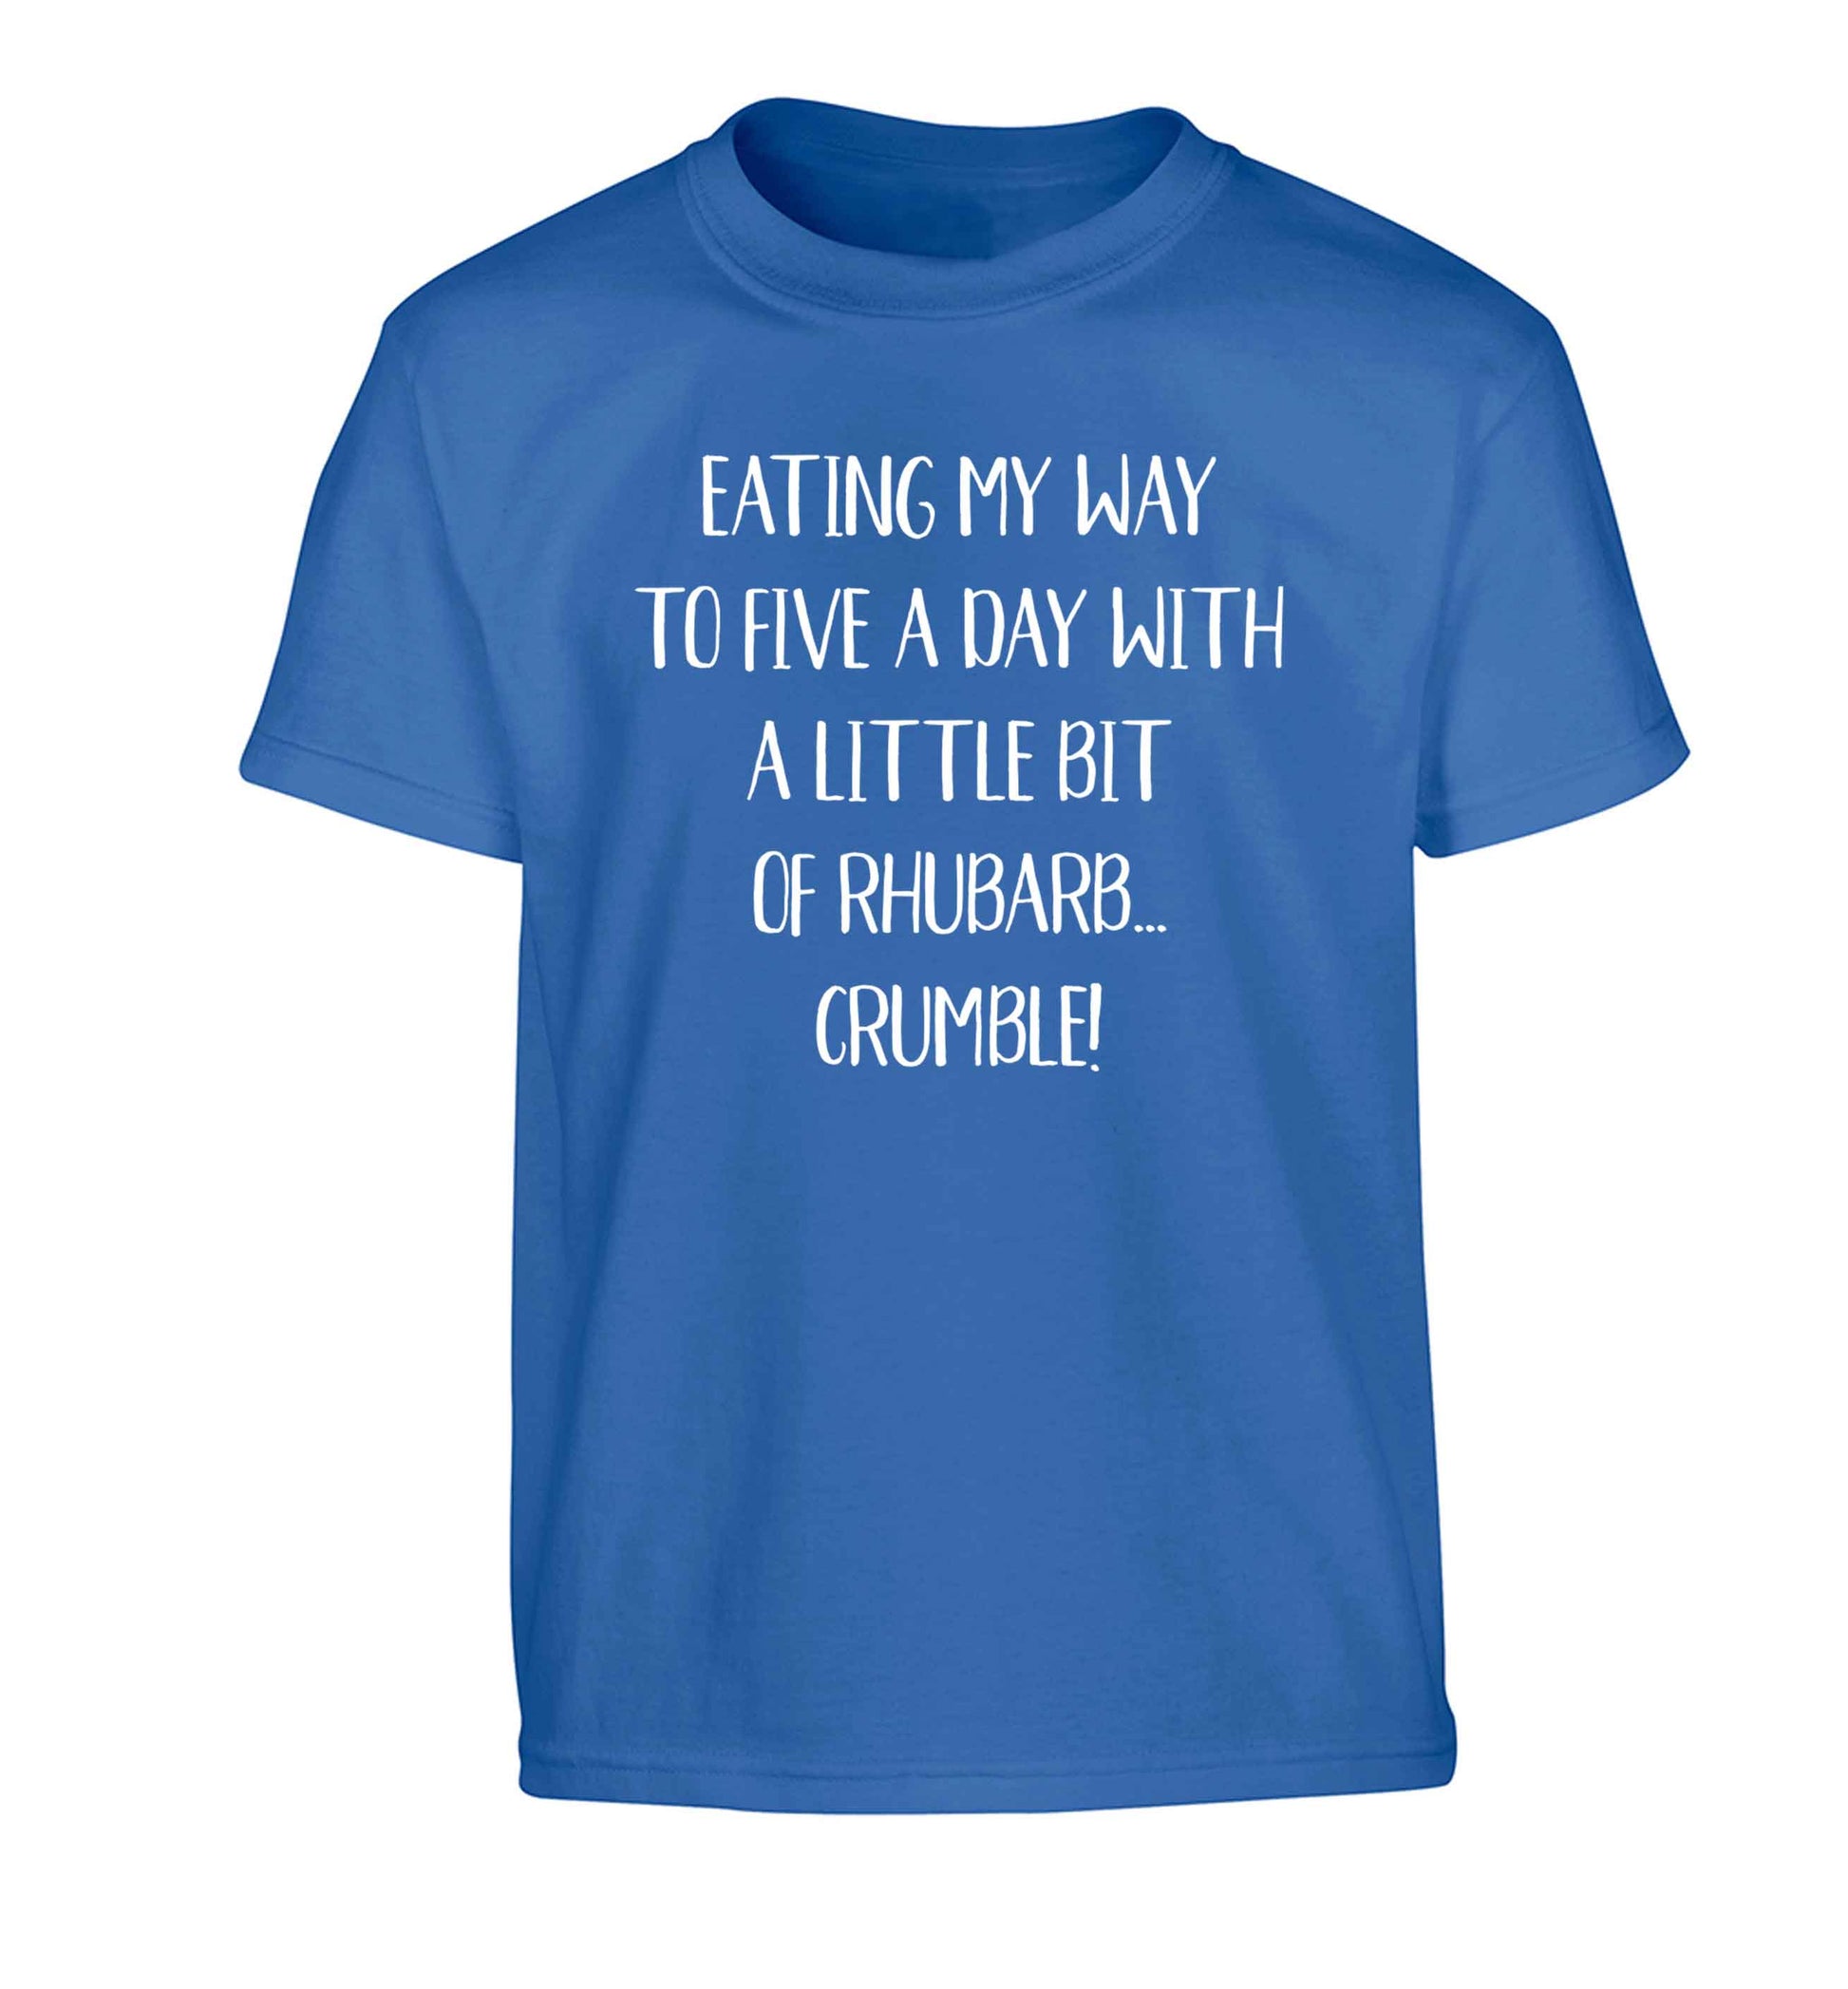 Eating my way to five a day with a little bit of rhubarb crumble Children's blue Tshirt 12-13 Years